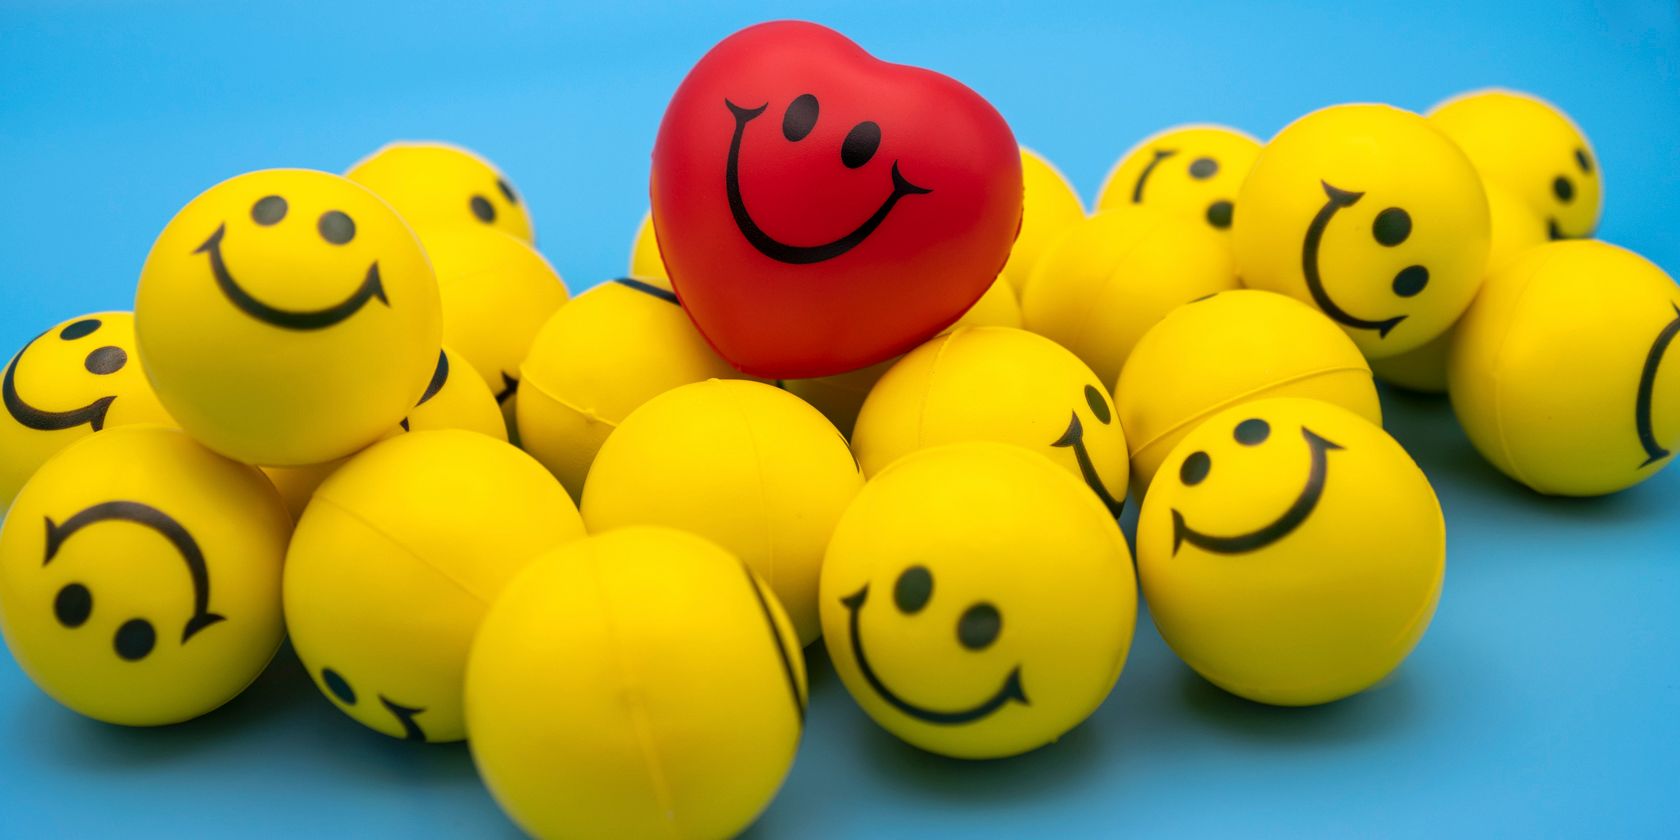 image of a range of smiley yellow emojis and a red heart emoji on a blue background